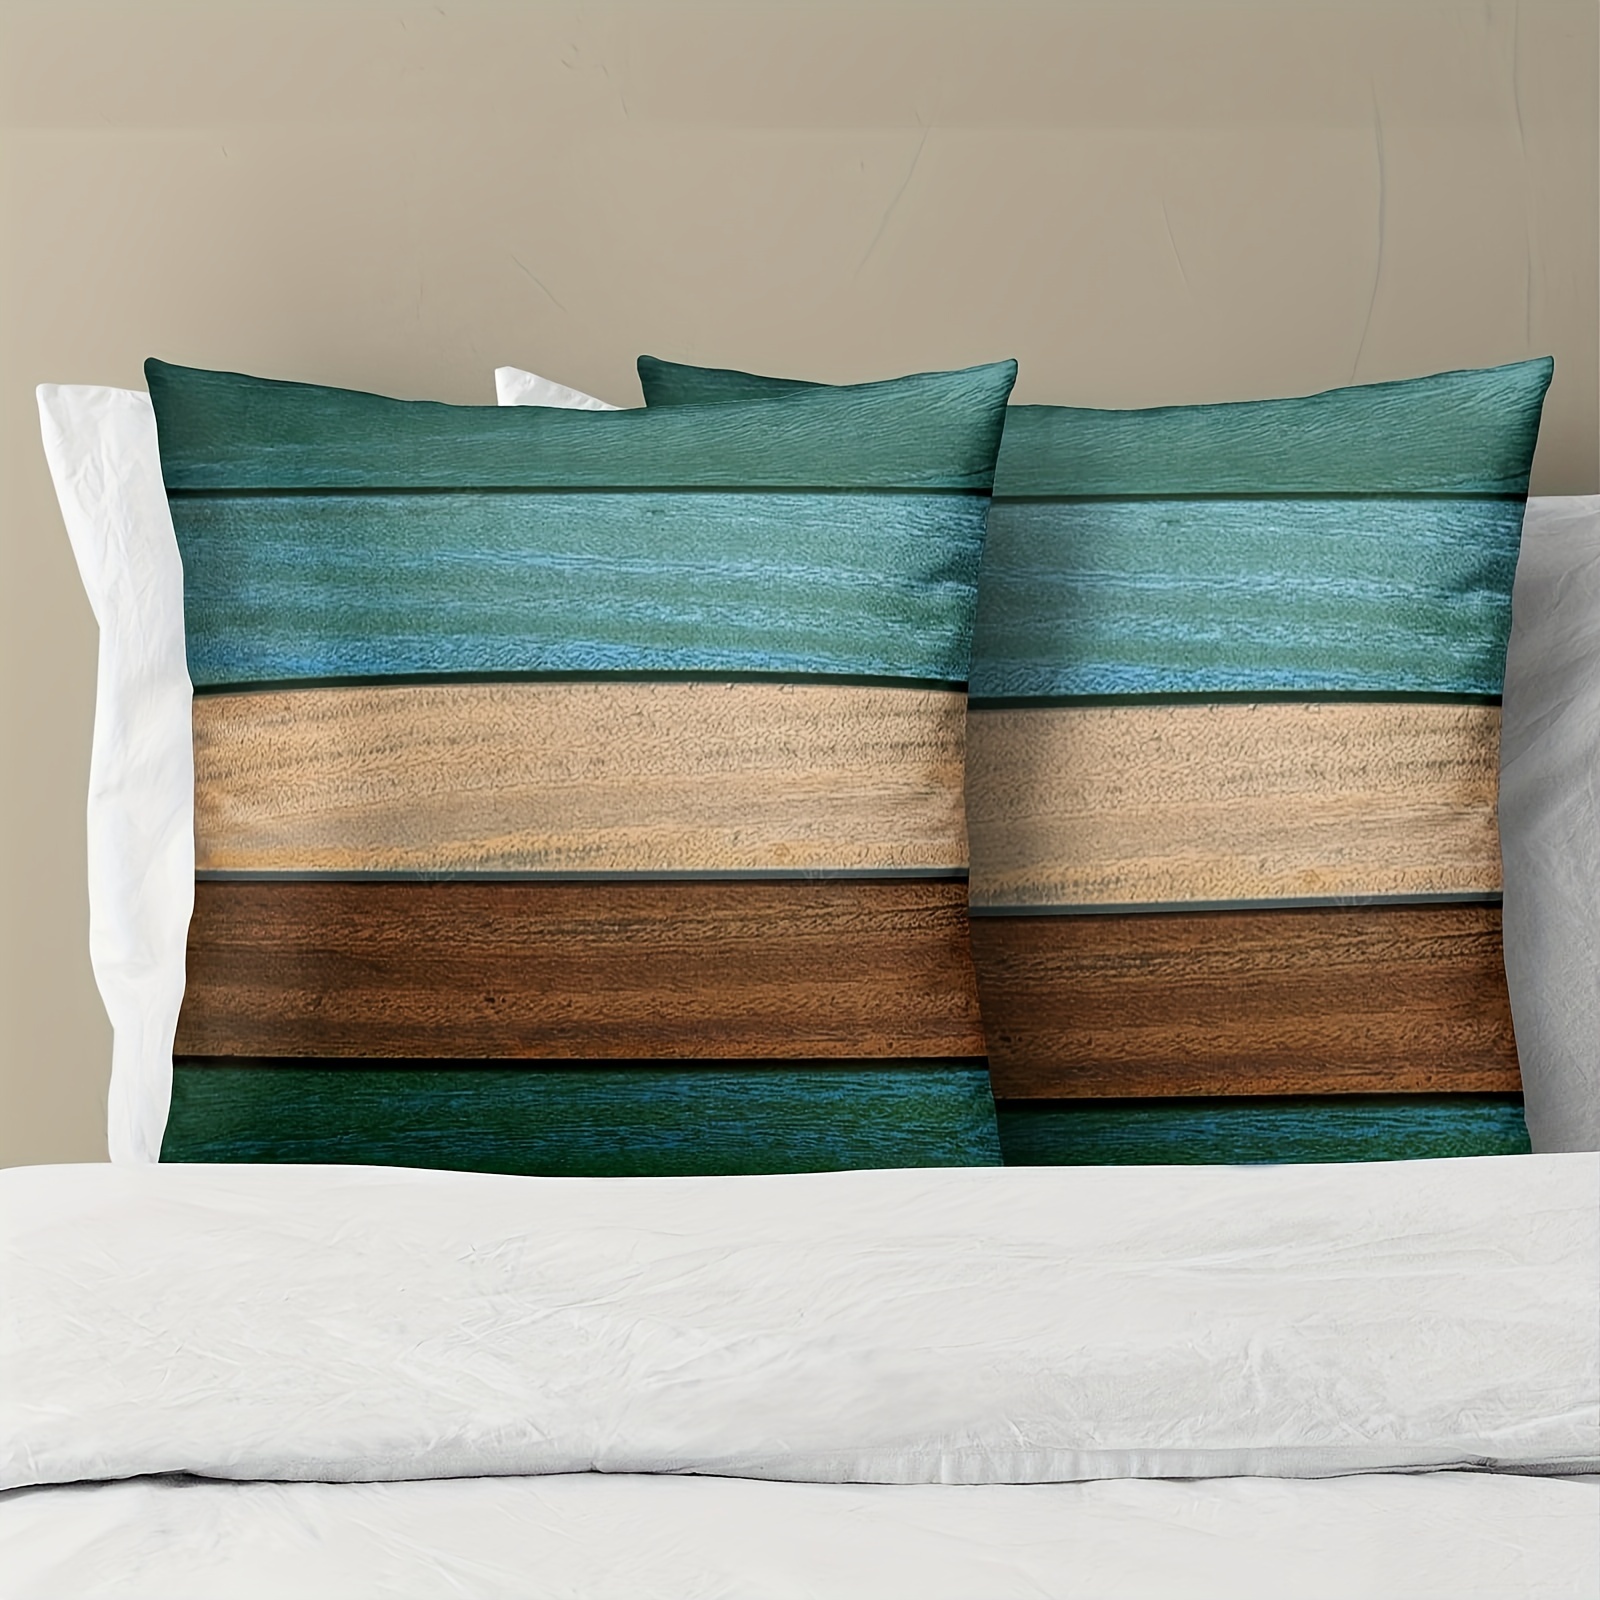 

2-piece Vintage Teal & Brown Plush Pillow Covers - Soft, Distressed Design With Natural Wood Patterns, Decorative Throw Cases For Living Room And Bedroom, 18x18 Inch, Zip Closure, Machine Washable